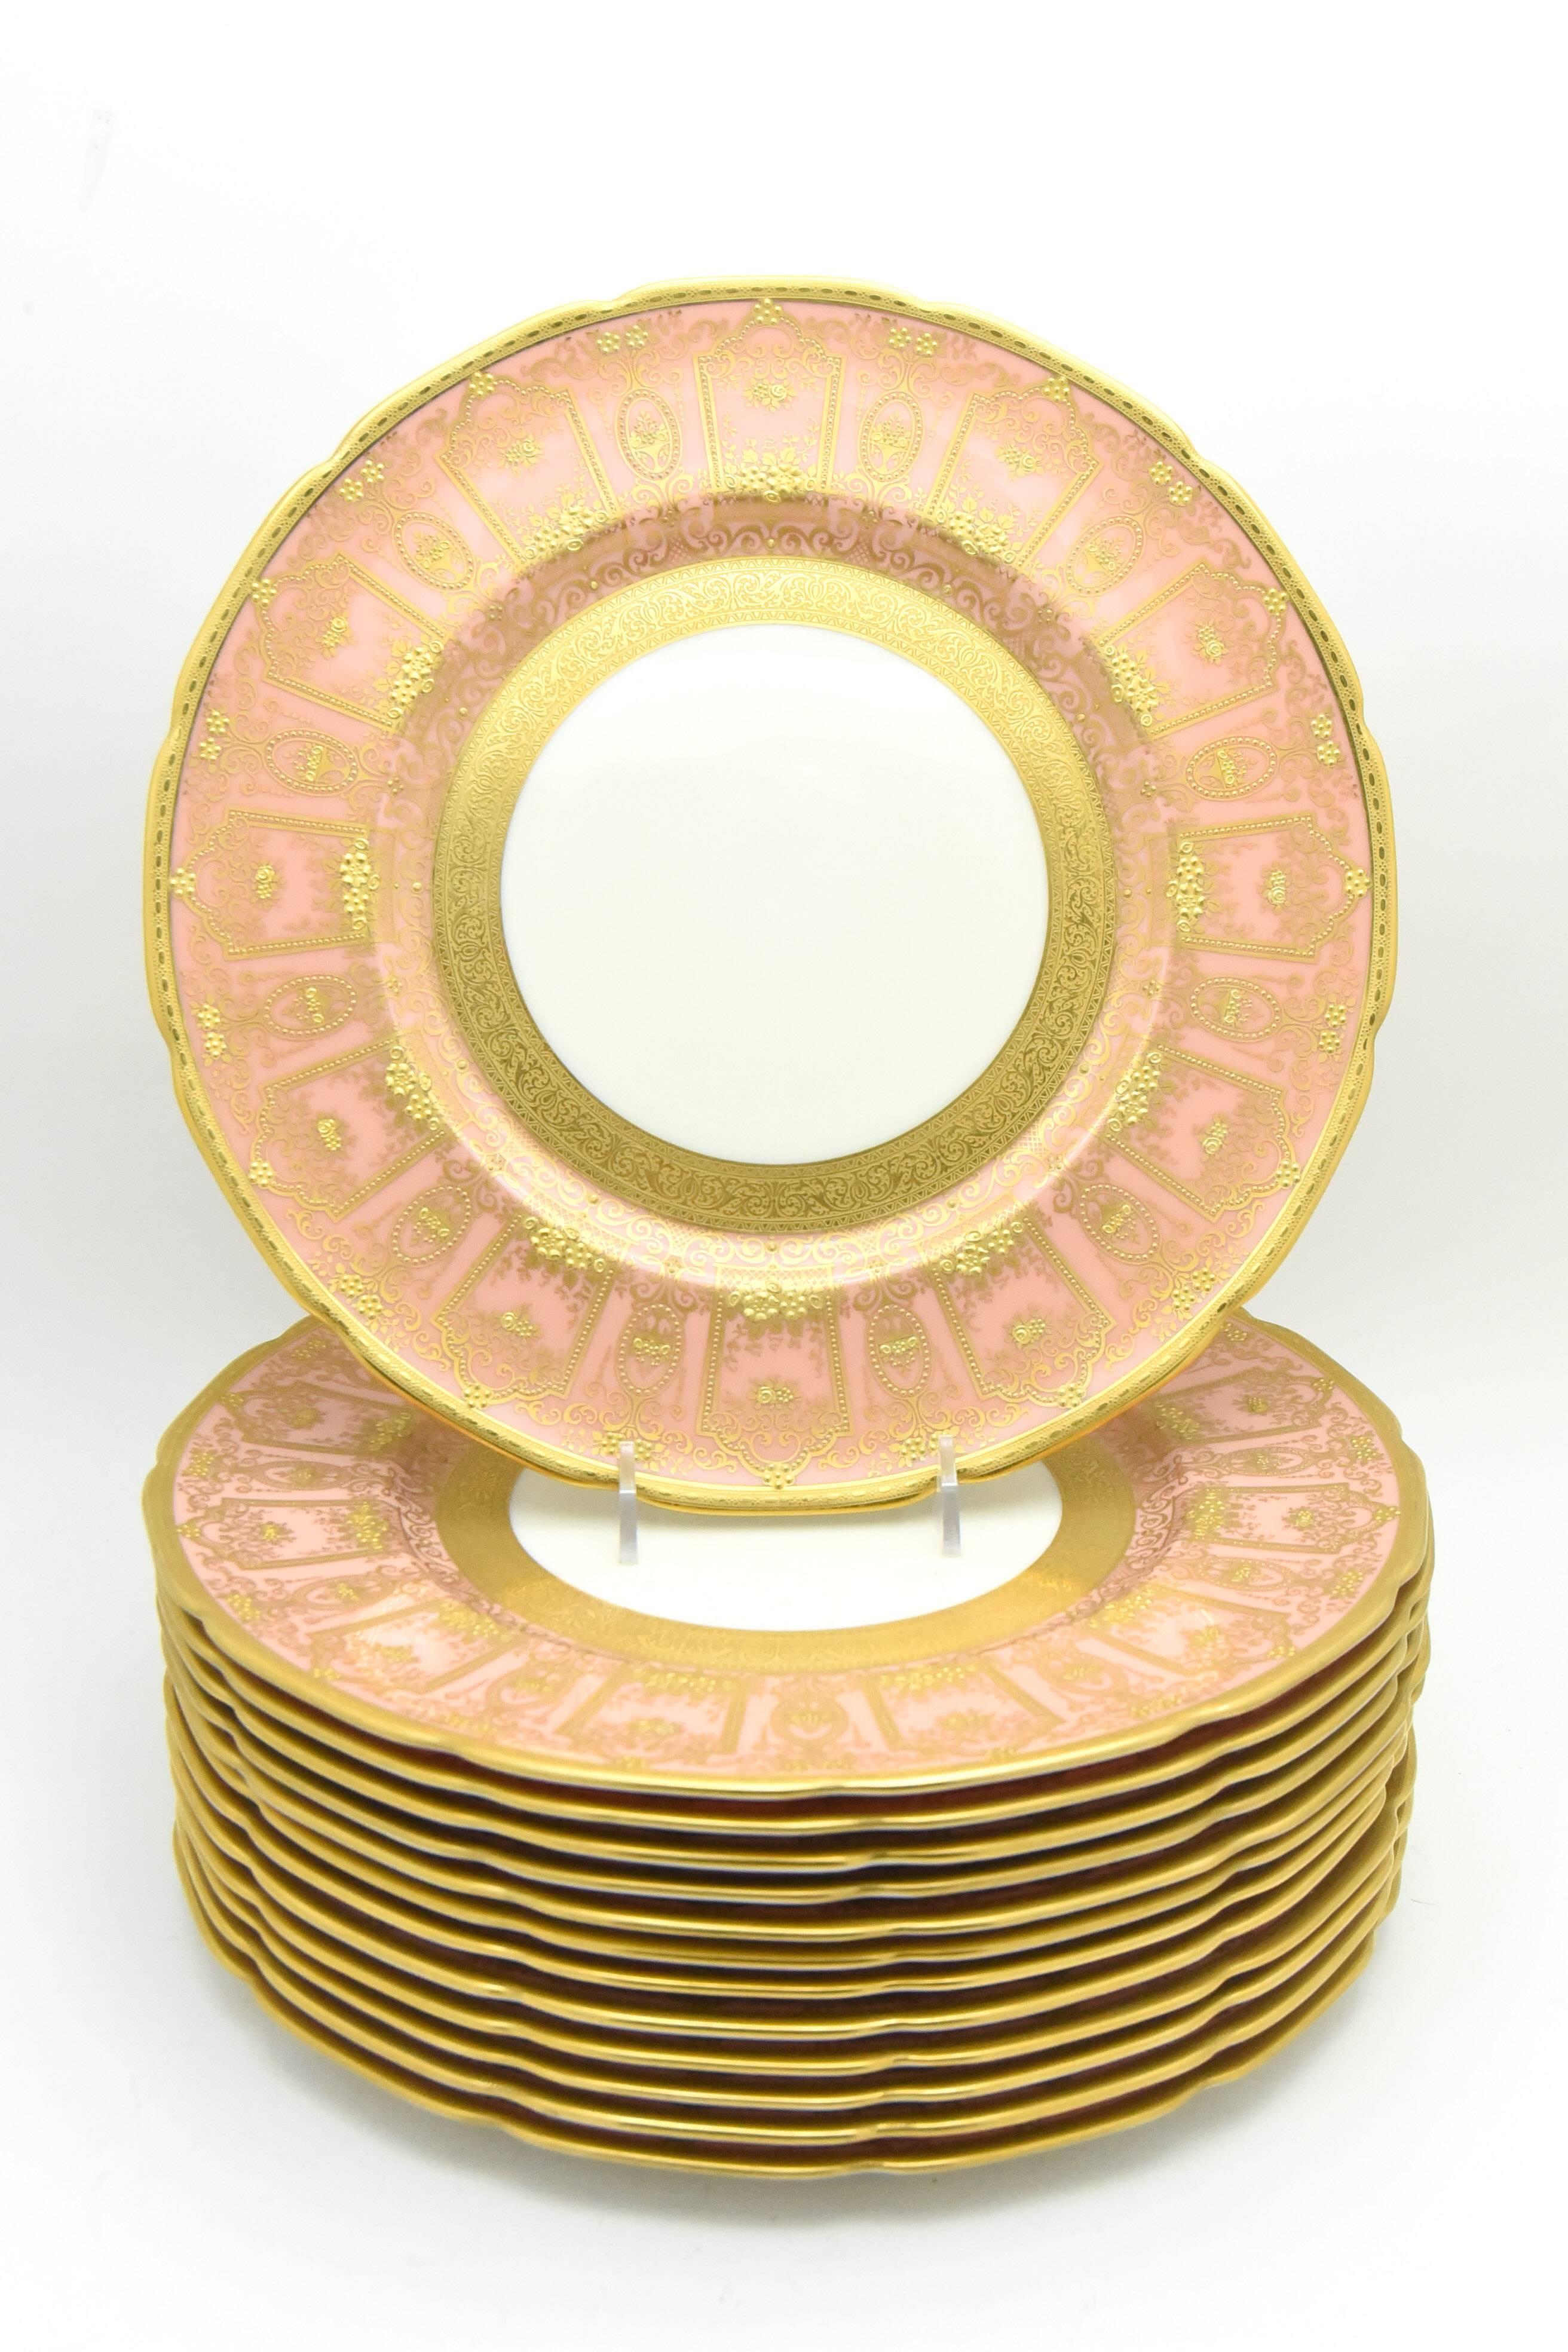 The set of 12 Lenox dinner plates feature a soft rose/pink border with shaped rims and elaborate acid-etched gold inner borders. The lavish raised paste gold neoclassical garlands and arches make an elegant statement. These are perfect as